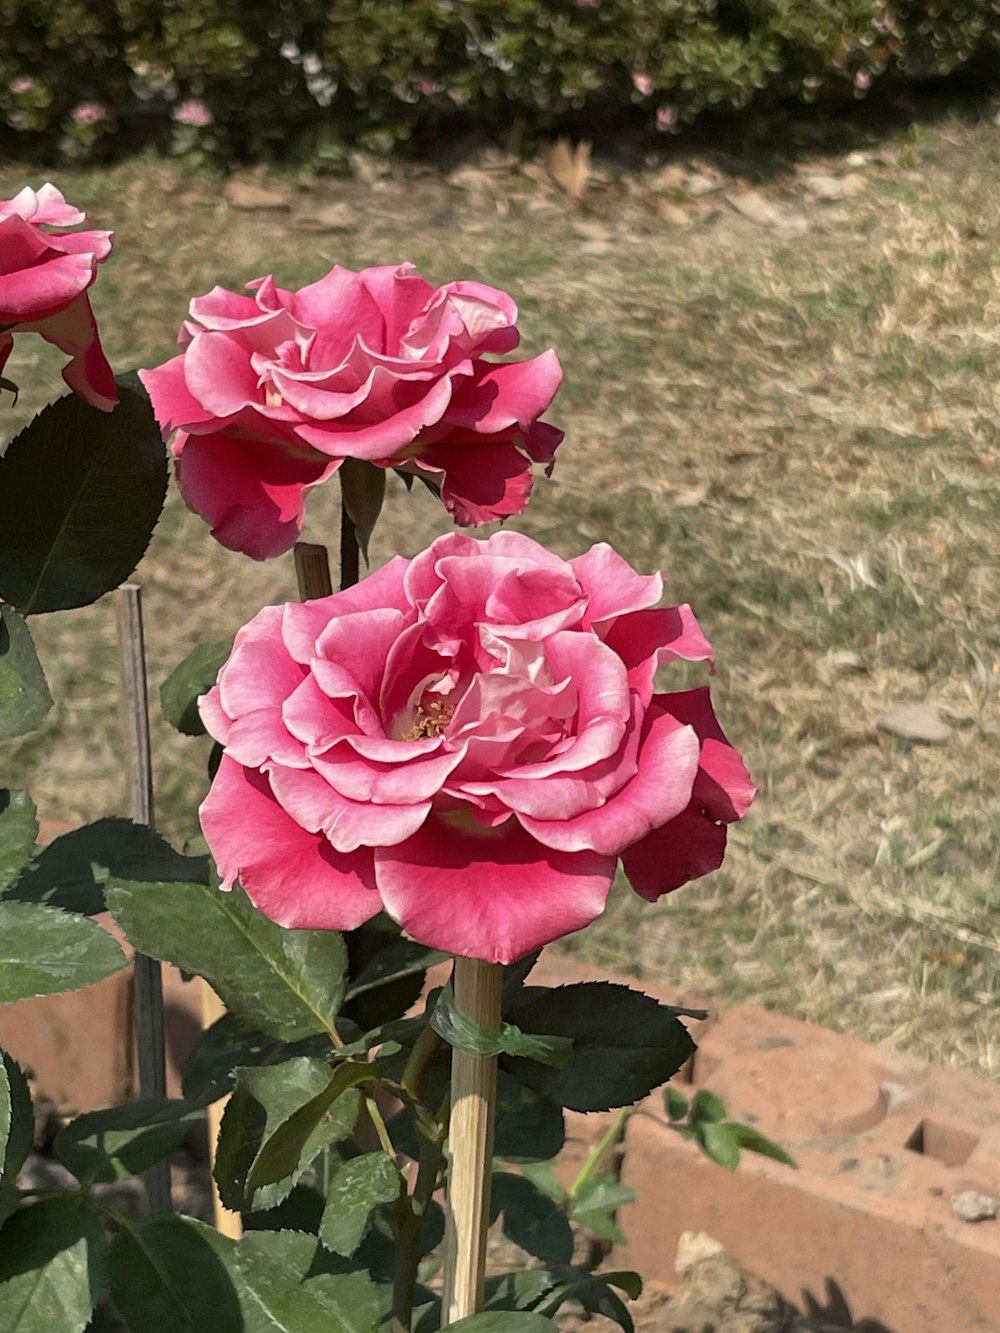 three pink roses blooming in a garden